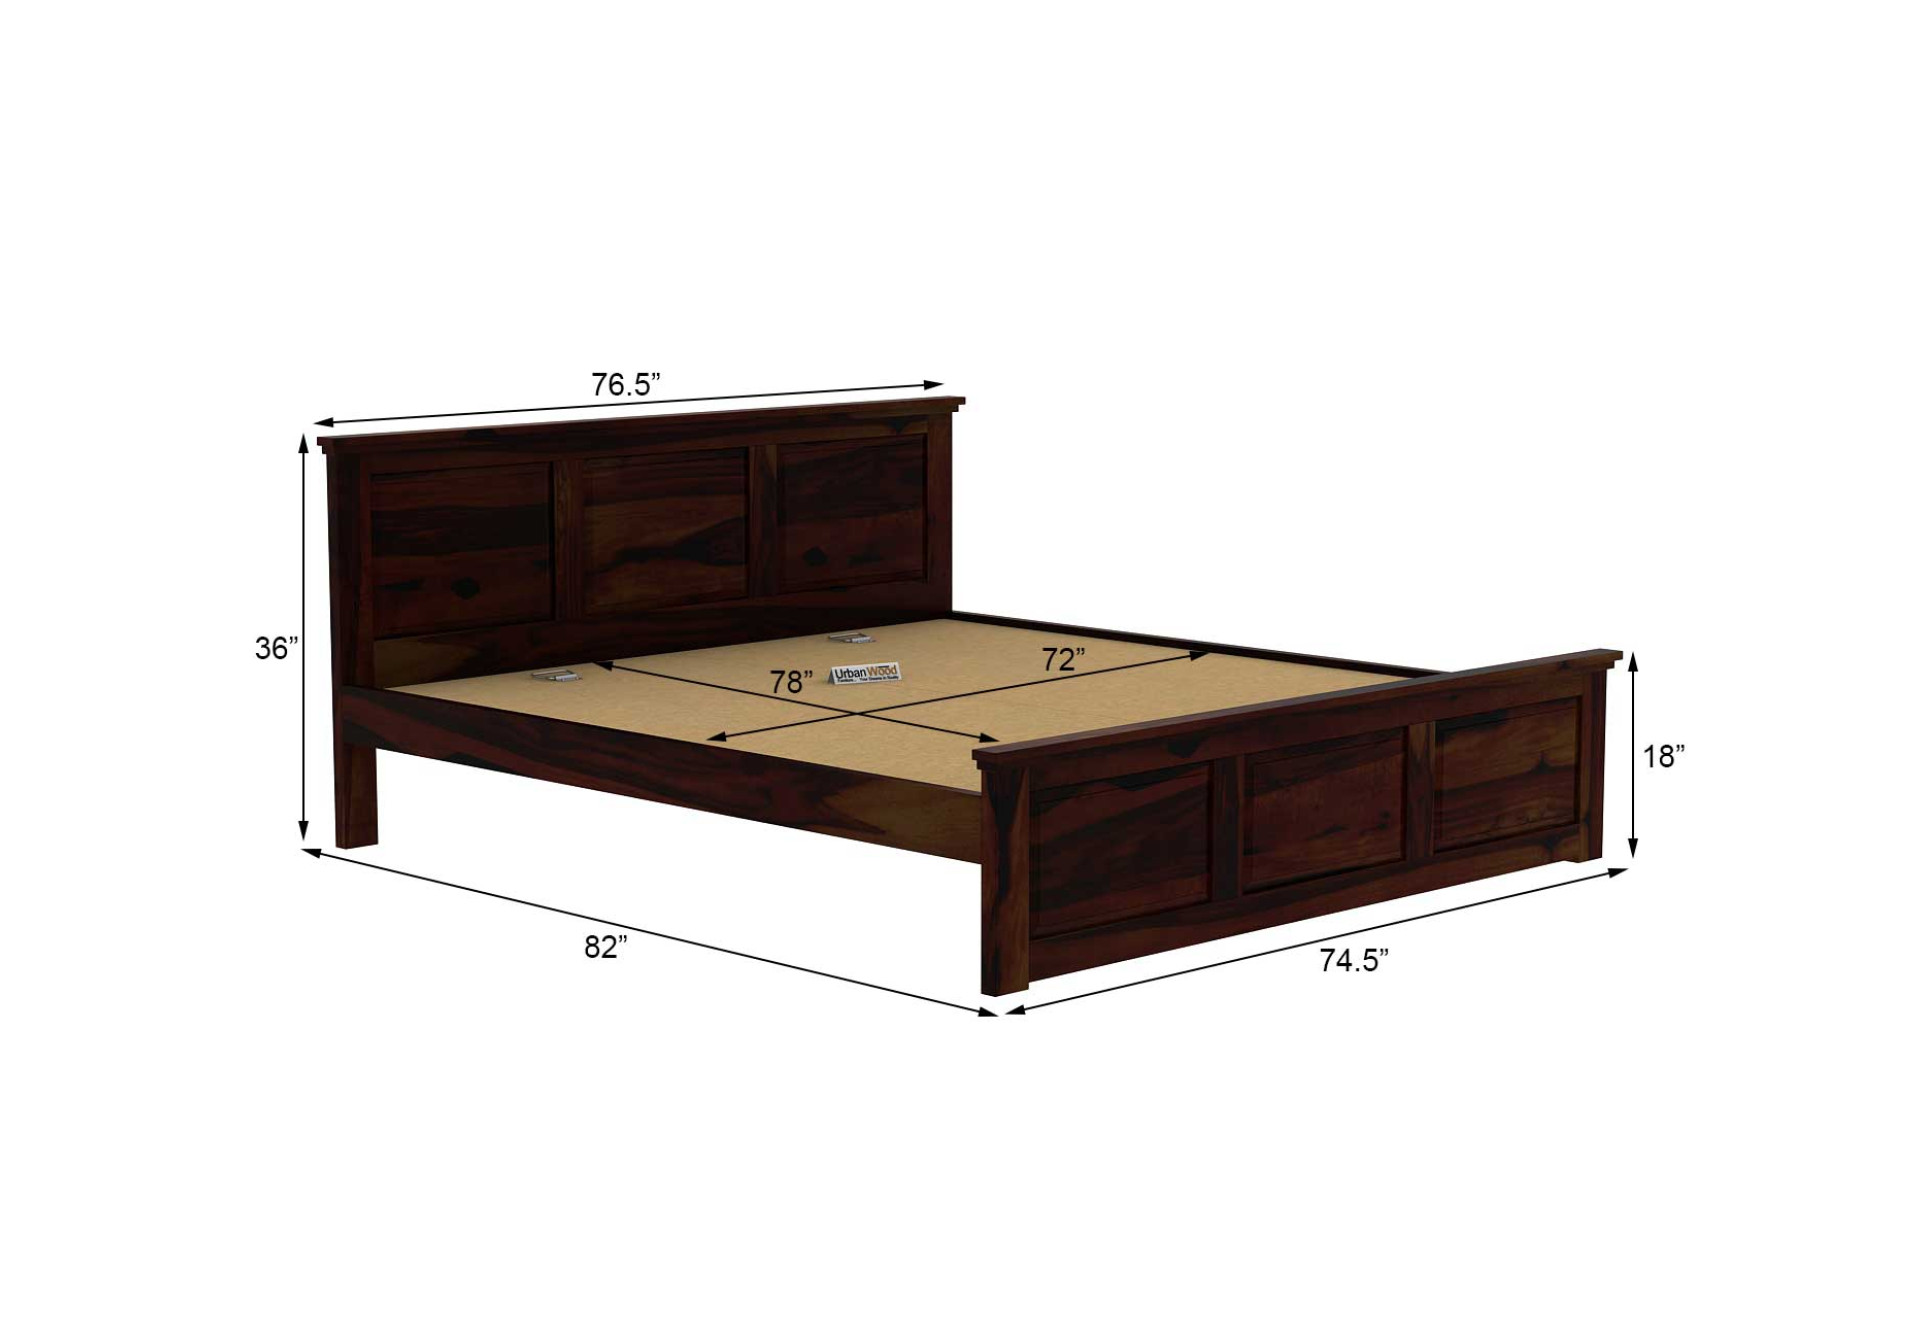 Babson Without Storage Bed (King Size, Walnut Finish)